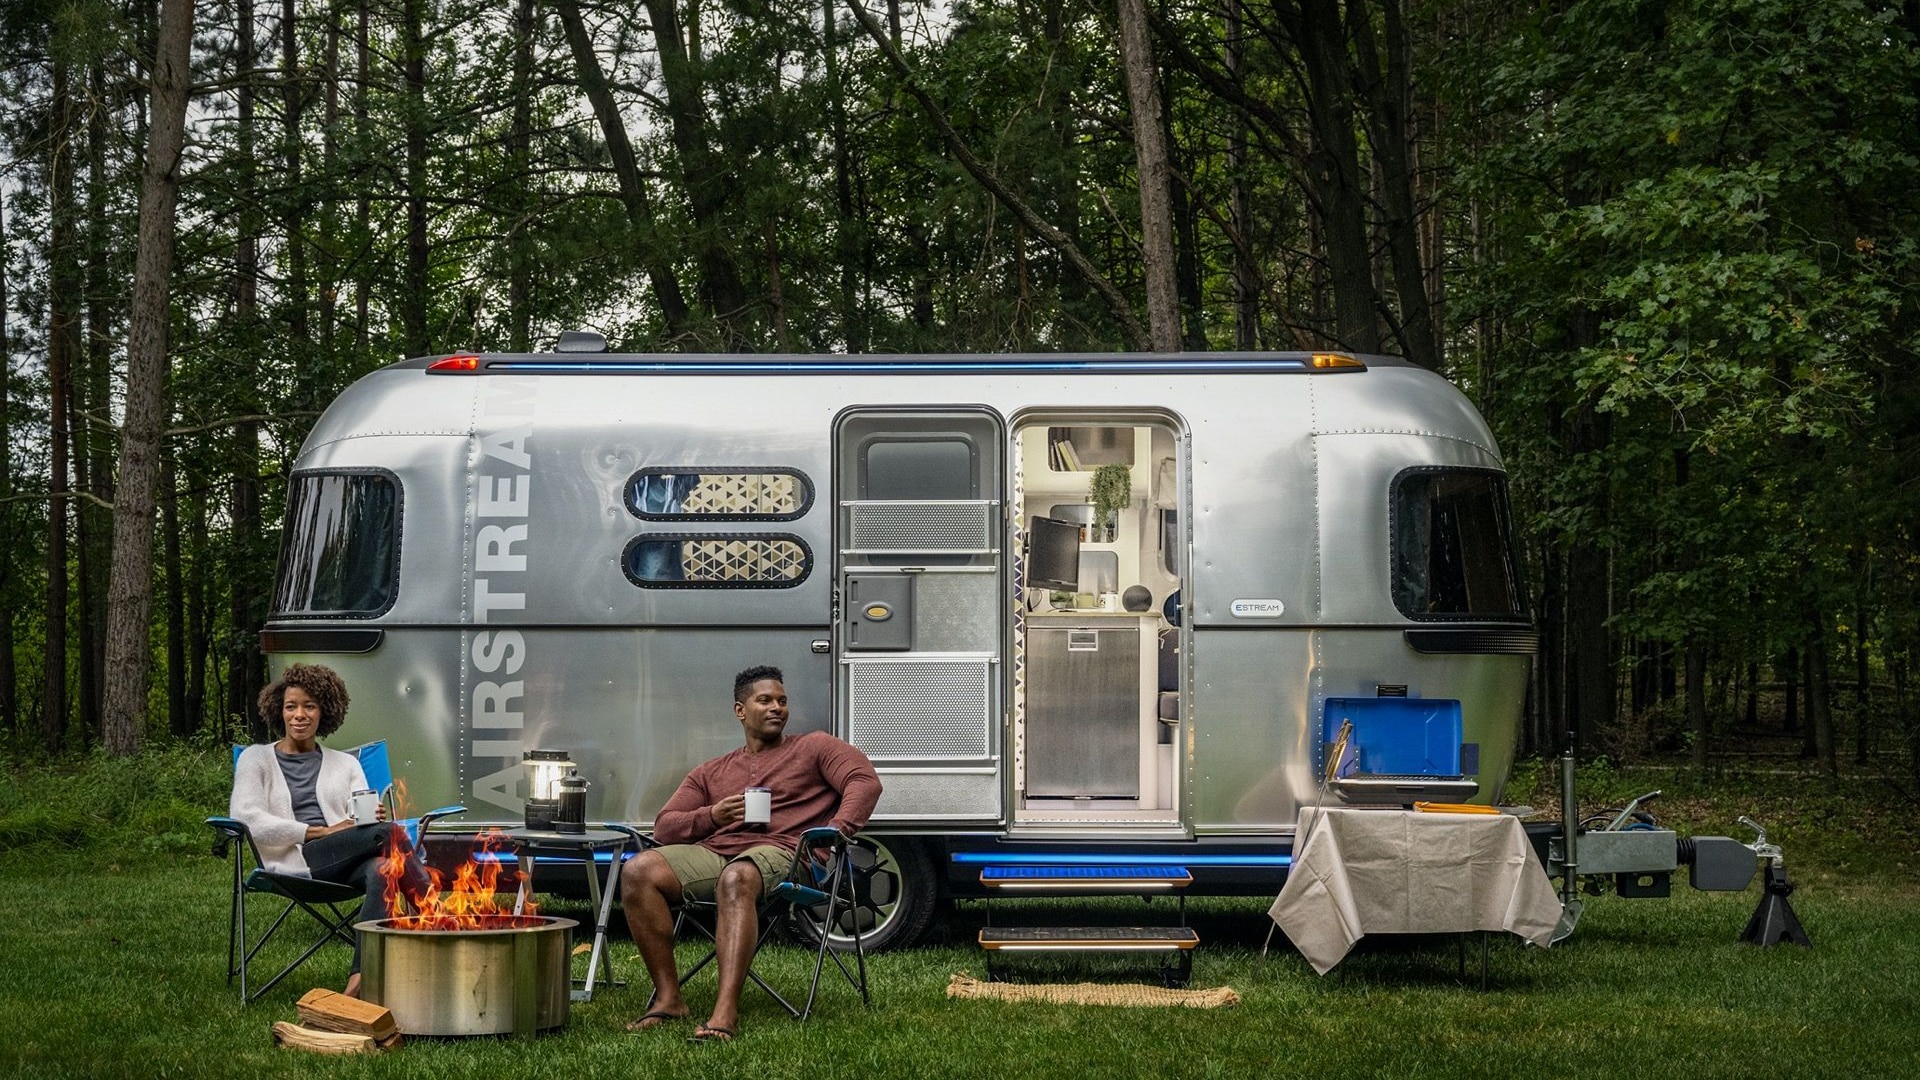 Electric Airstream trailer concept points to the future of sustainable